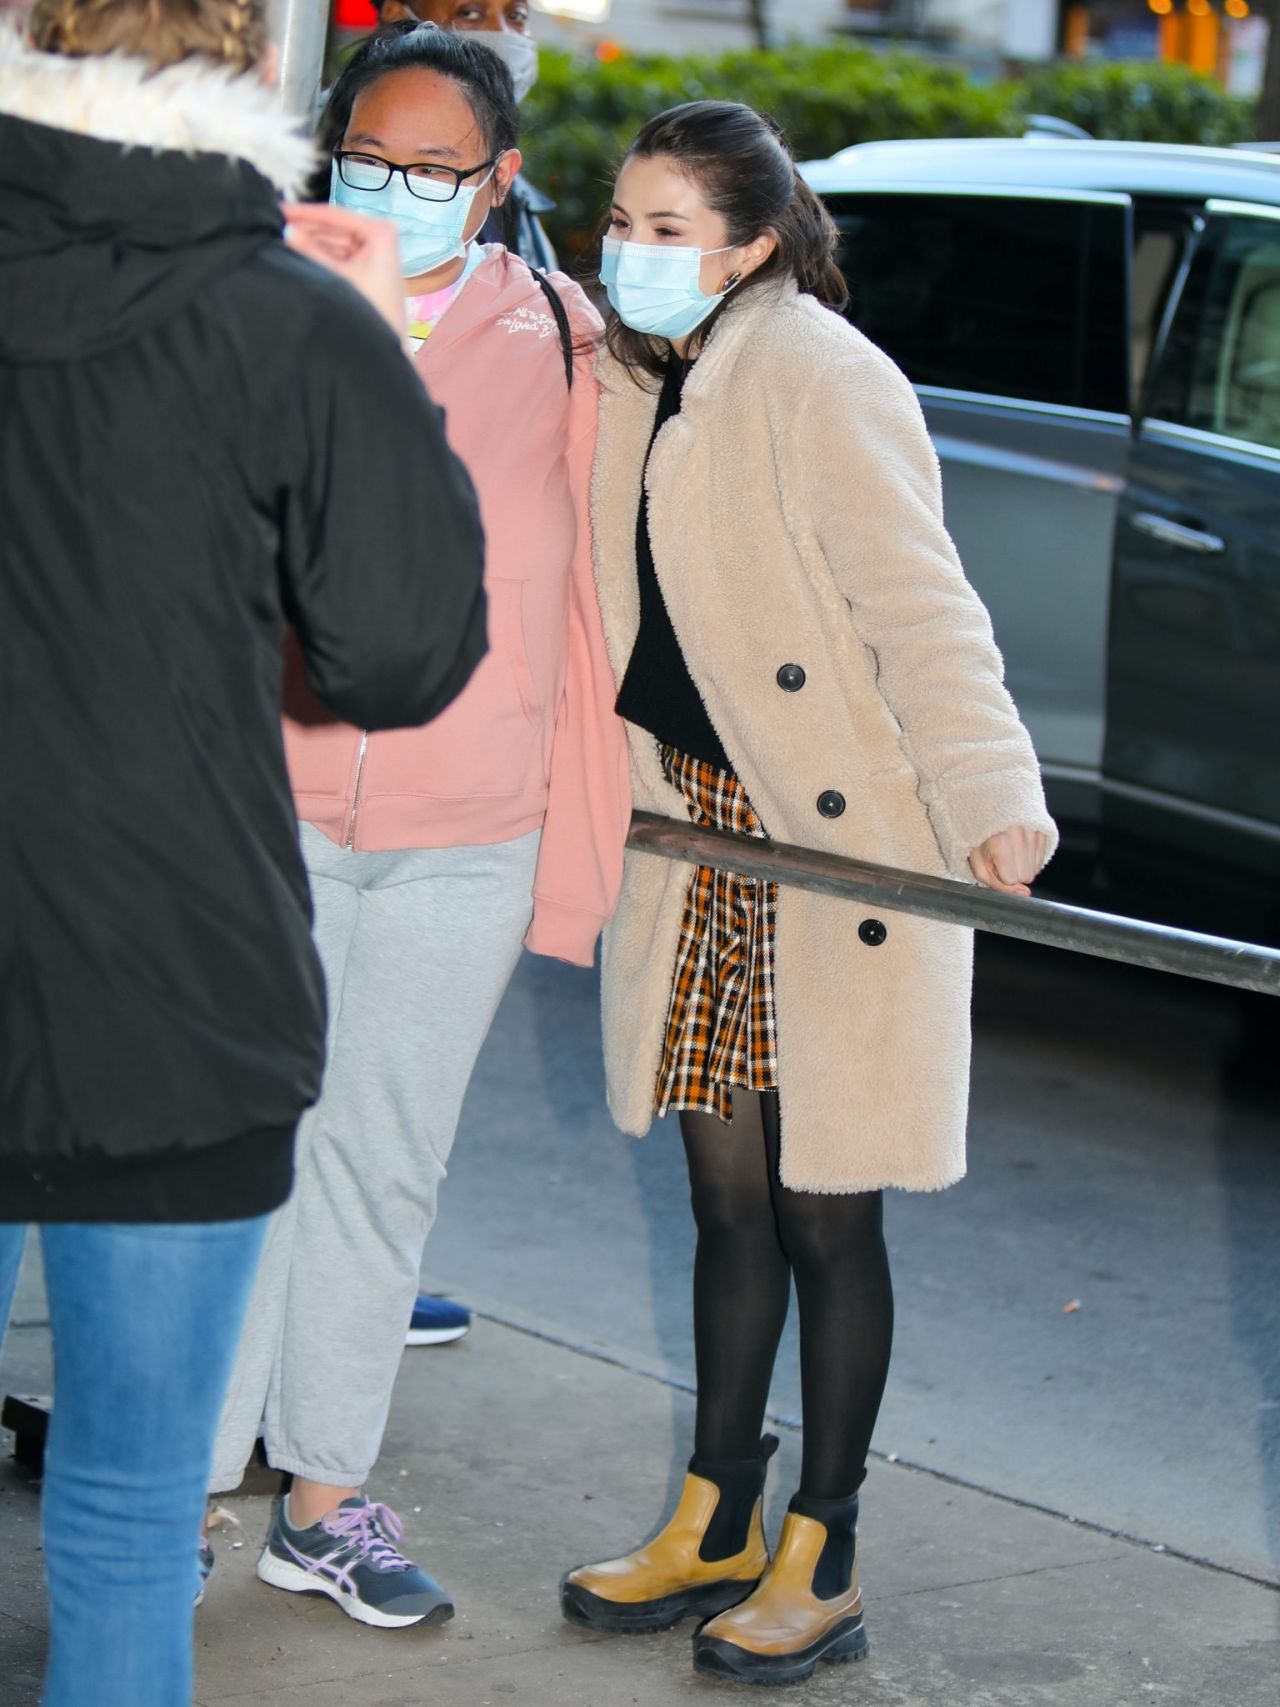 Selena Gomez - "Only Murders in The Building" Filming Set in NYC 03/31